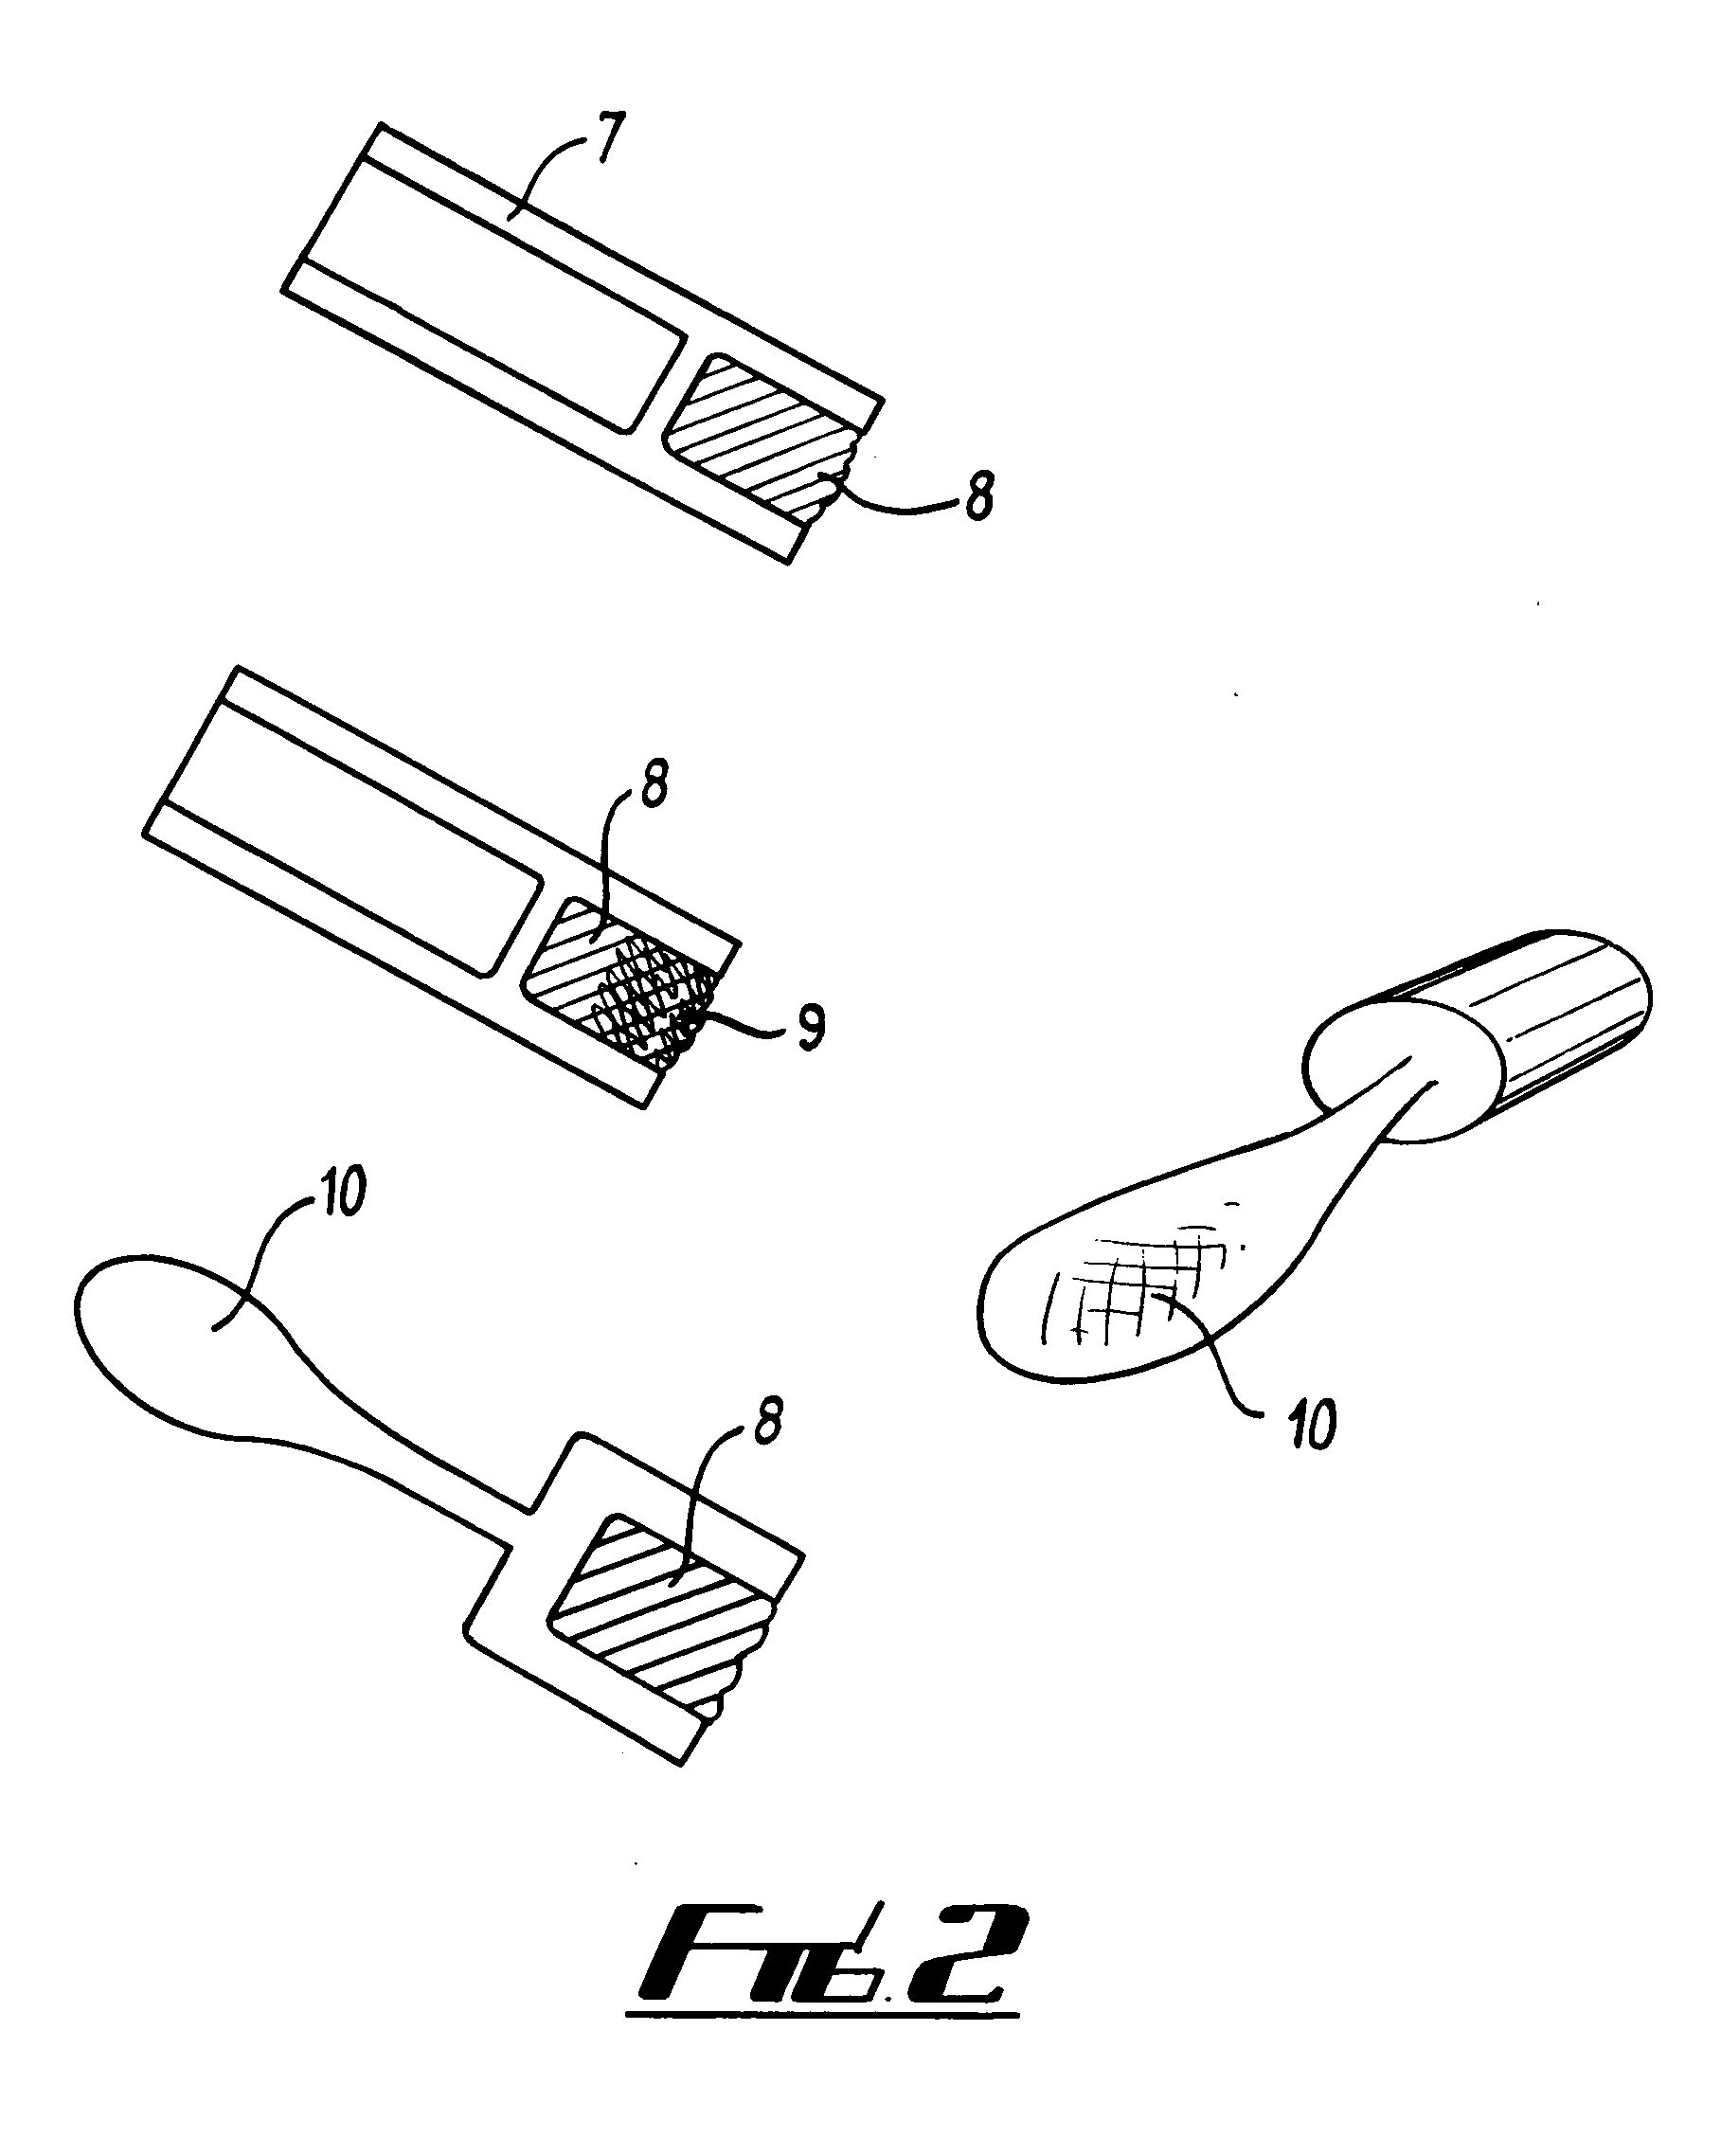 Method and apparatus for alcohol concentration detection in a blood sample